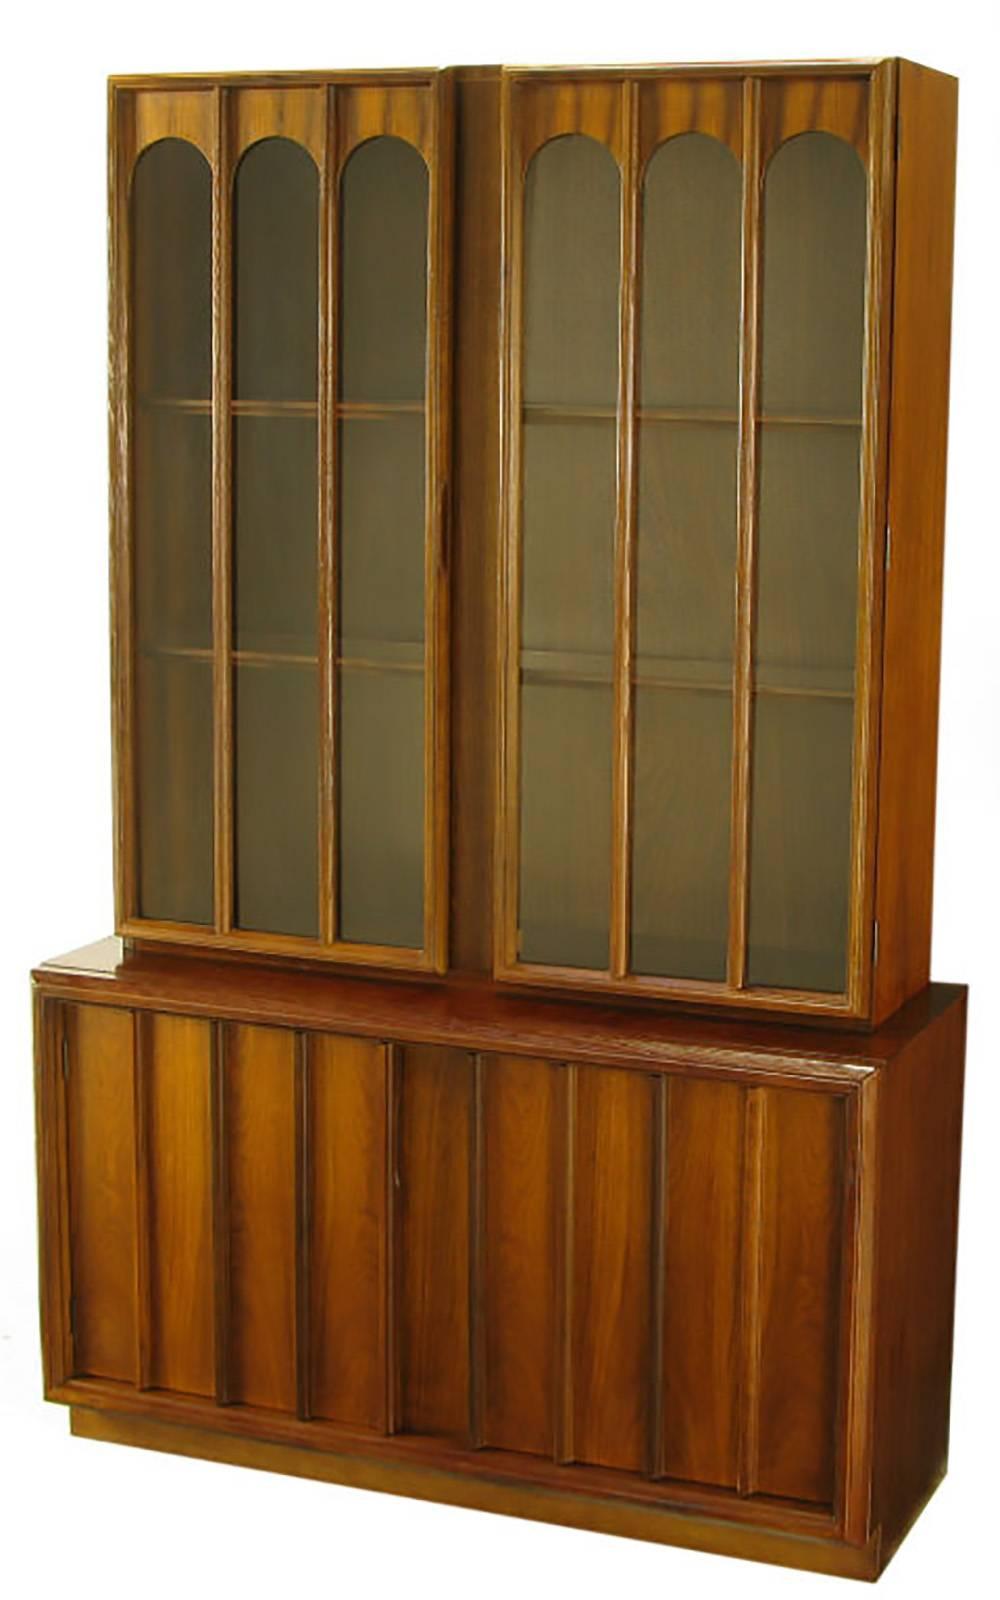 Before financial strife forced its merger into Keller Williams Furniture, Keller Furniture was the dream of a Tulsa, OK designer. An example of Keller's early work is this tall cabinet, with glass and walnut wood colonnade doors for the illuminated